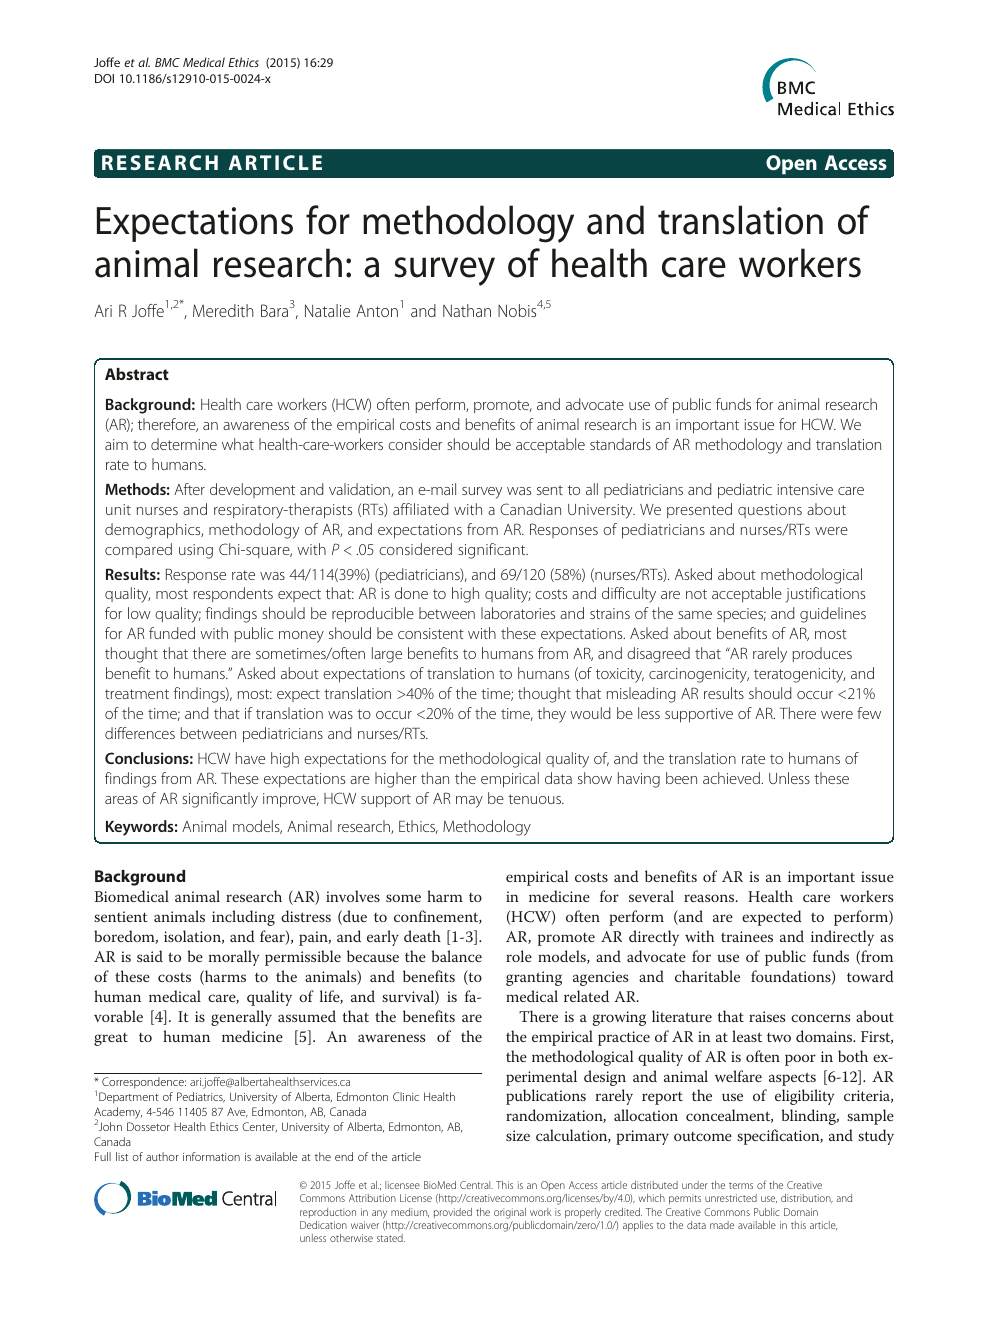 Expectations for methodology and translation of animal research: a survey  of health care workers – topic of research paper in Biological sciences.  Download scholarly article PDF and read for free on CyberLeninka